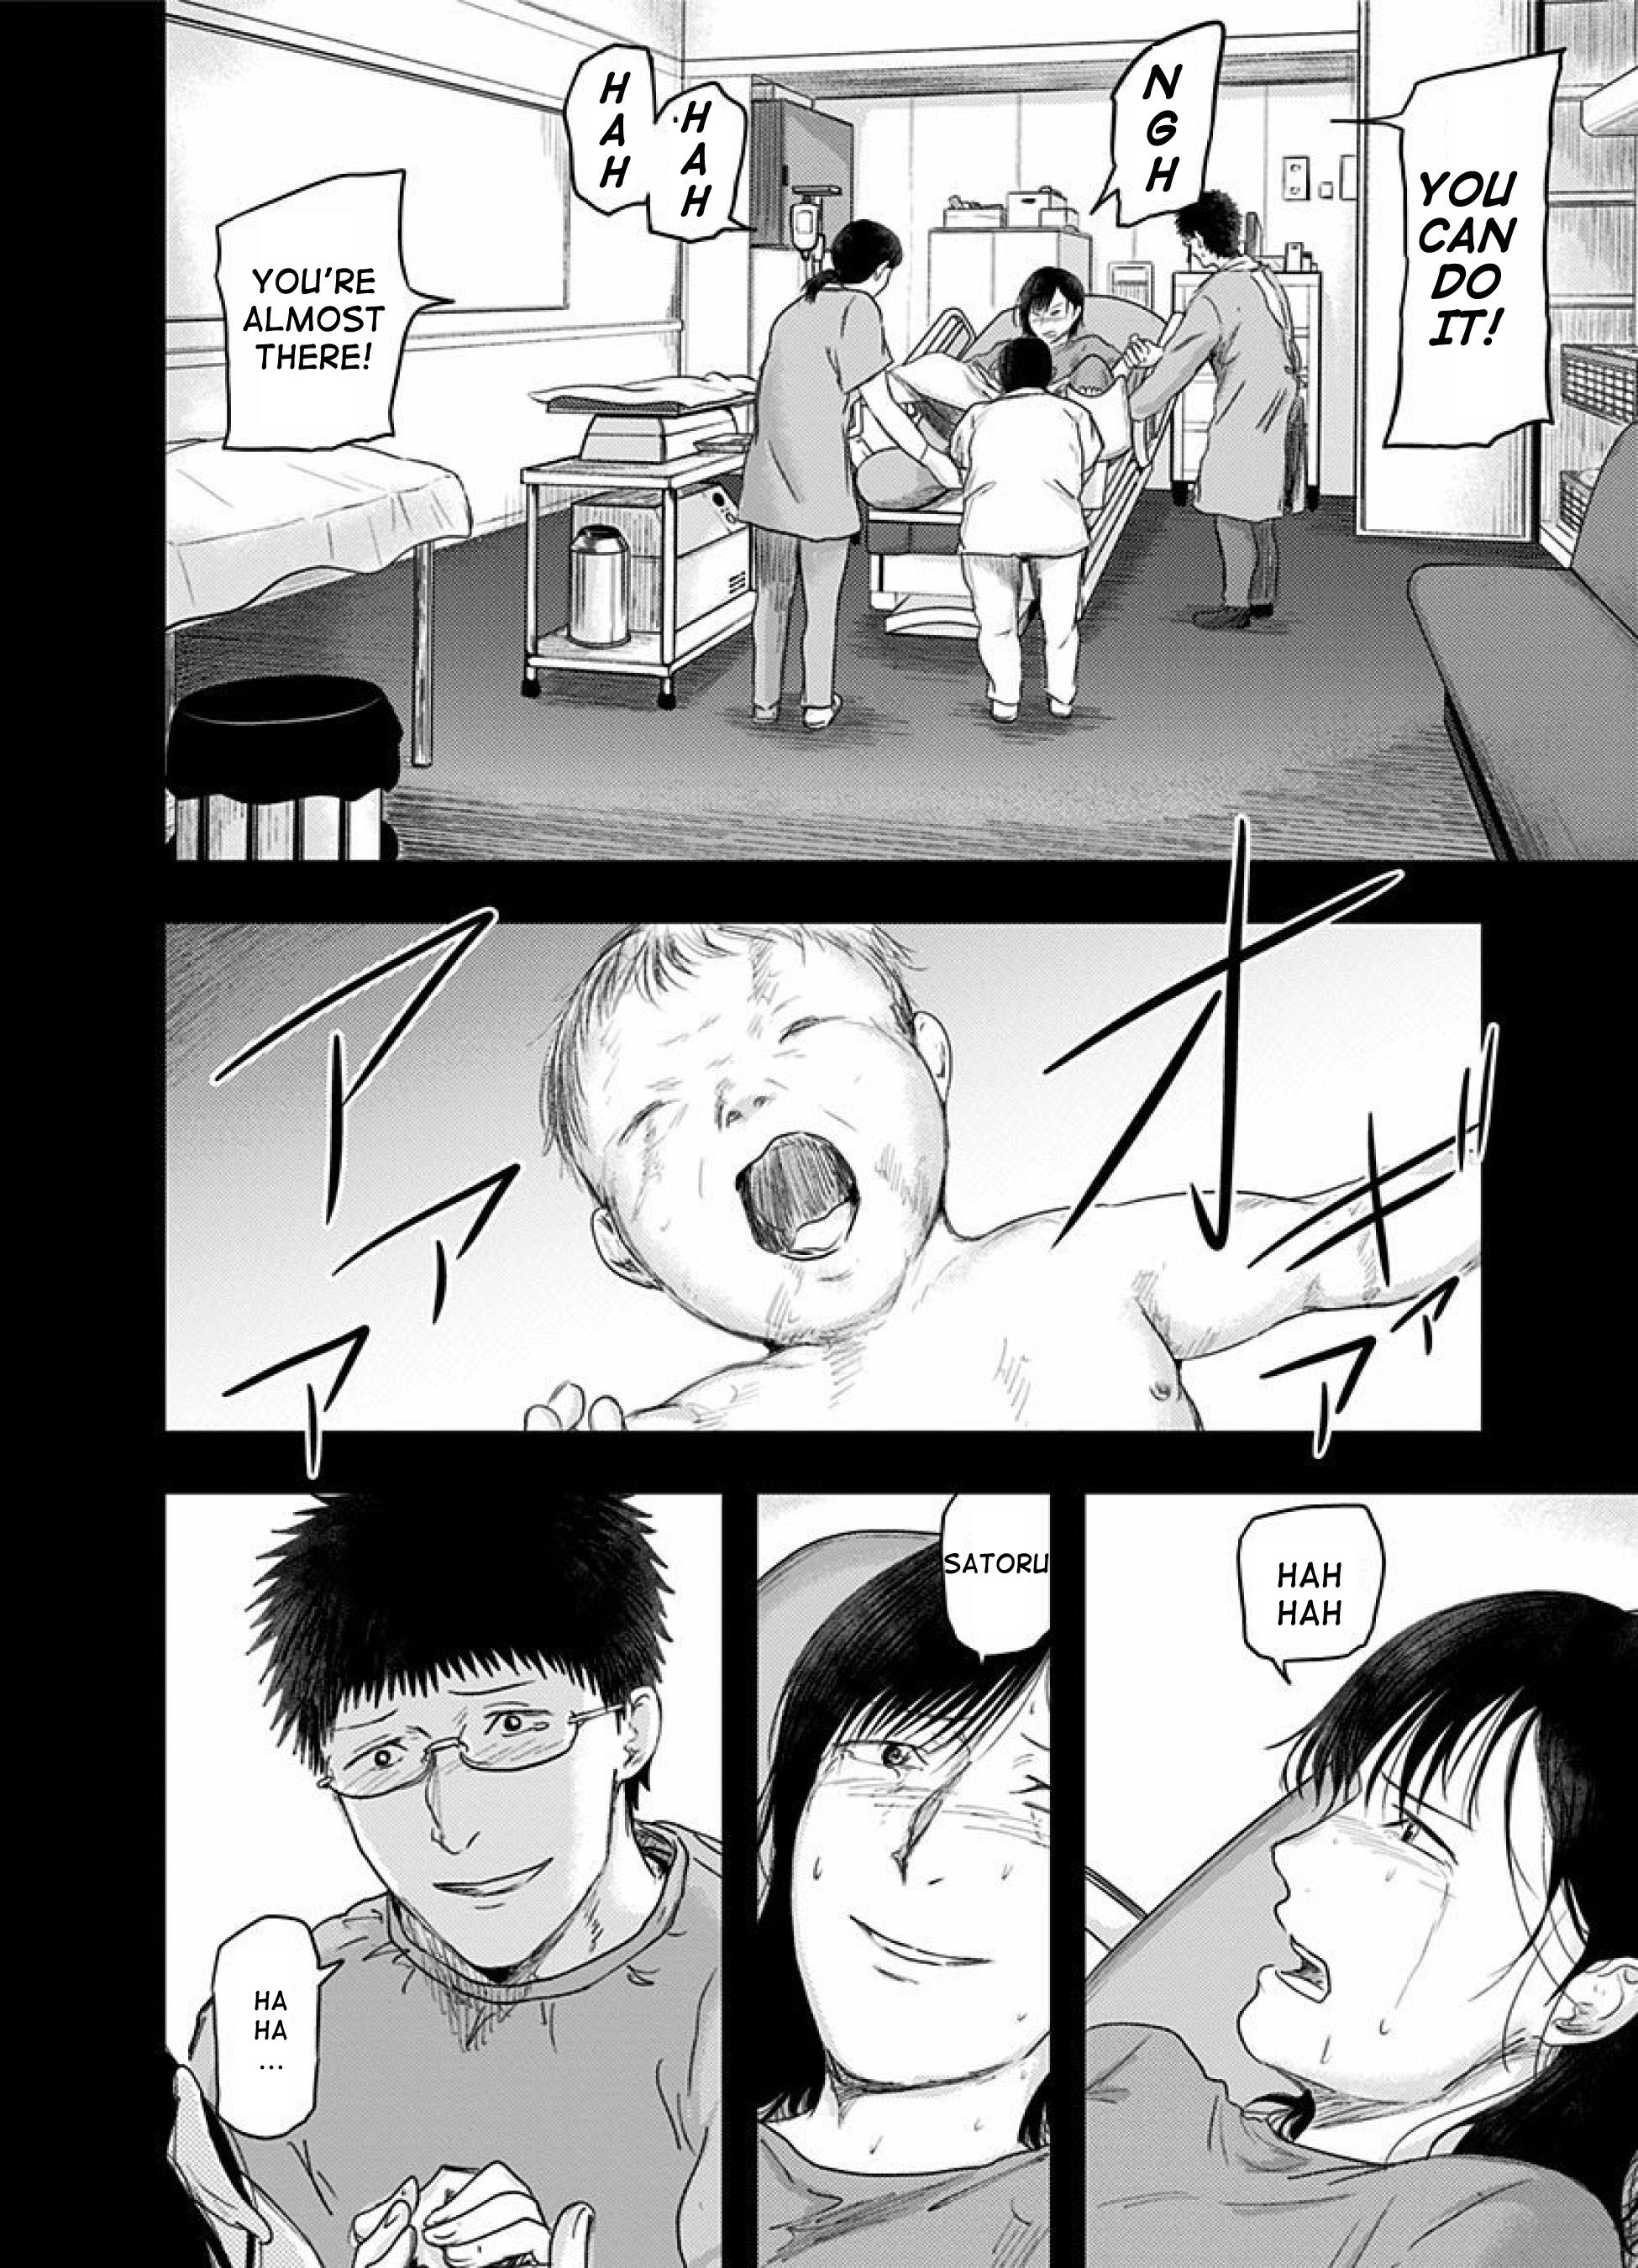 Route End Chapter 46 Read Route End Chapter 46 Online At Allmanga Us Page 4